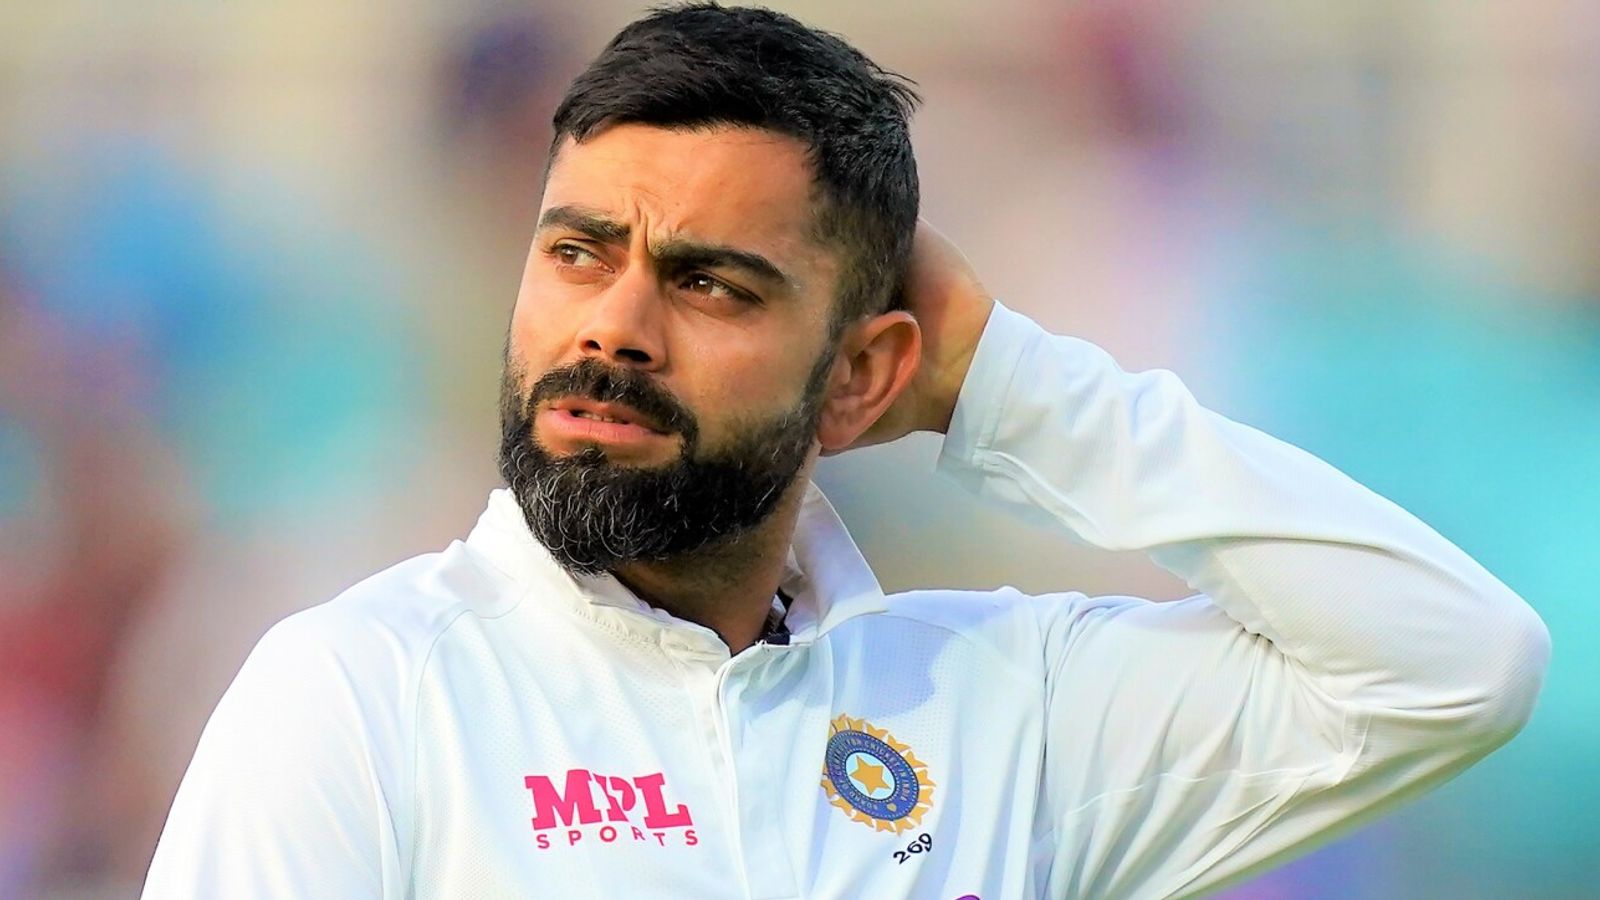 IND vs ENG: Virat Kohli Not yet fit, Might Not Take Part in the Second ODI against England